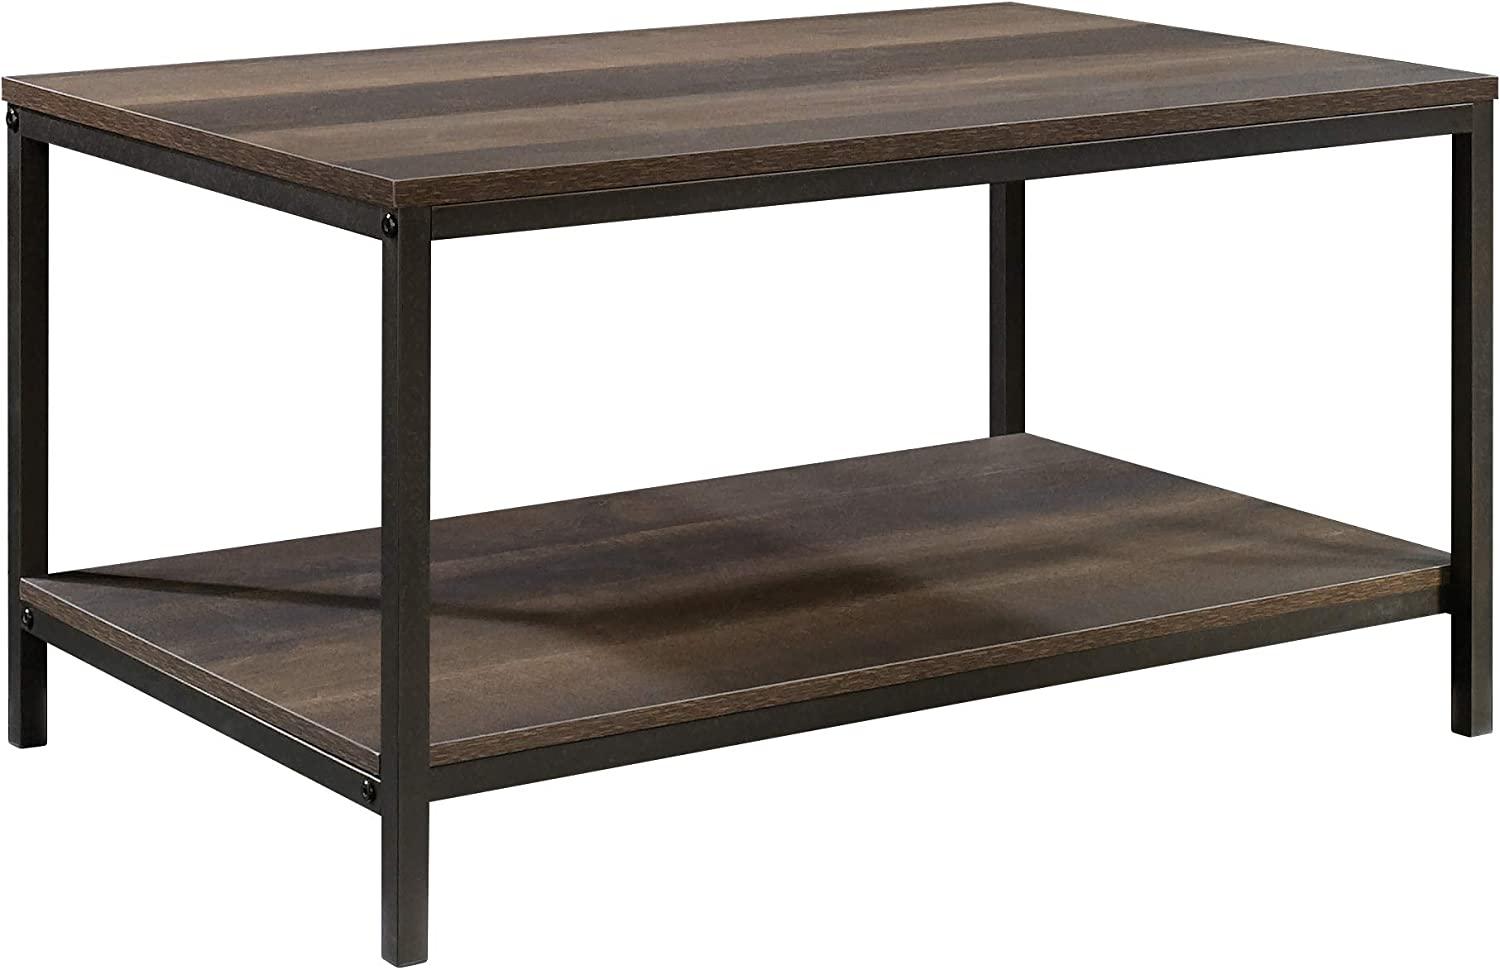 Sauder North Avenue Coffee Table Smoked Oak for $29.98 Shipped